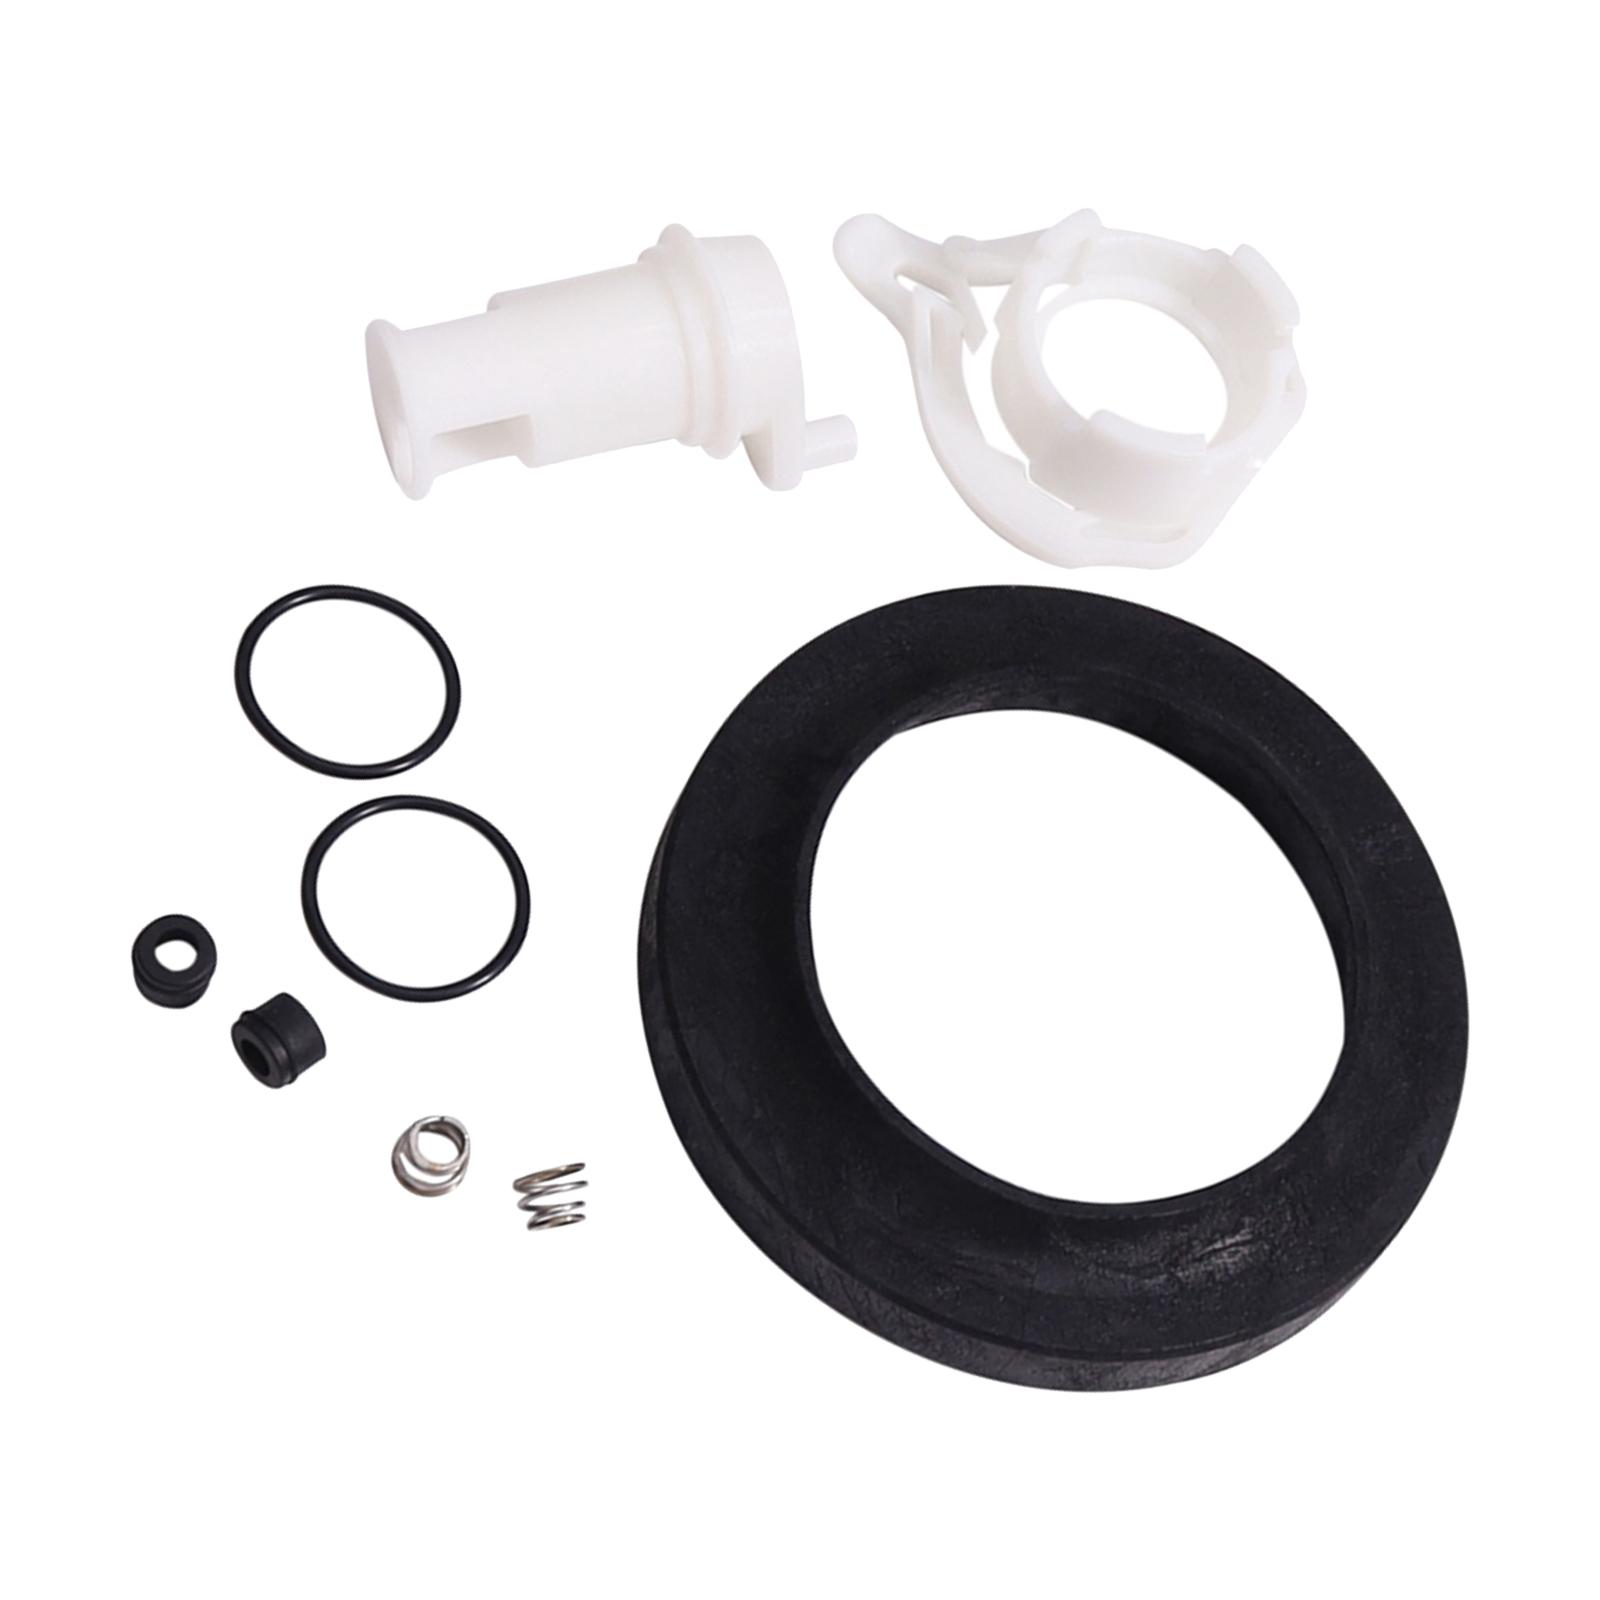 42049 Toilet Water Valve Set Accessory for